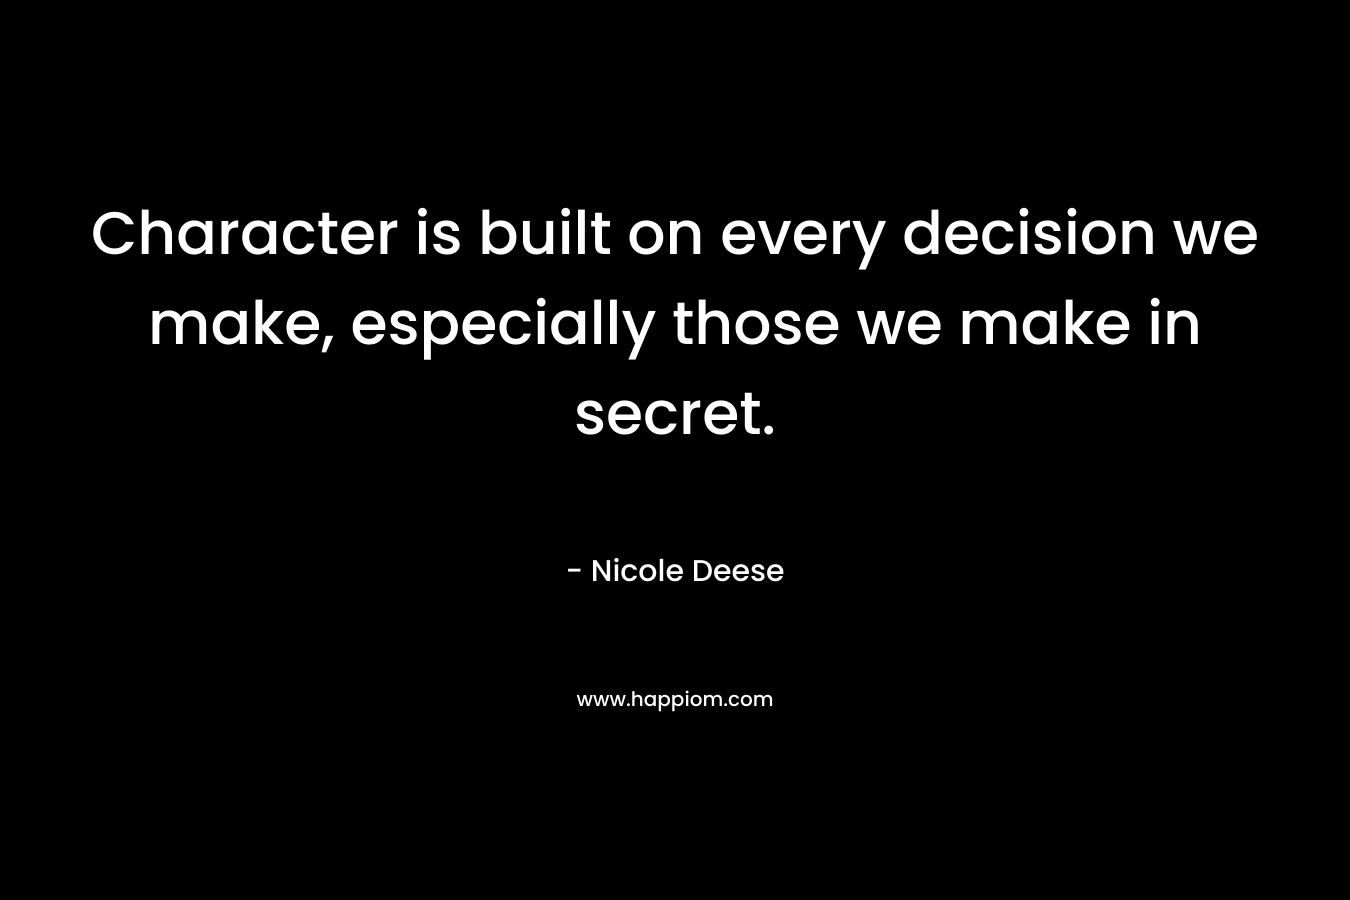 Character is built on every decision we make, especially those we make in secret.